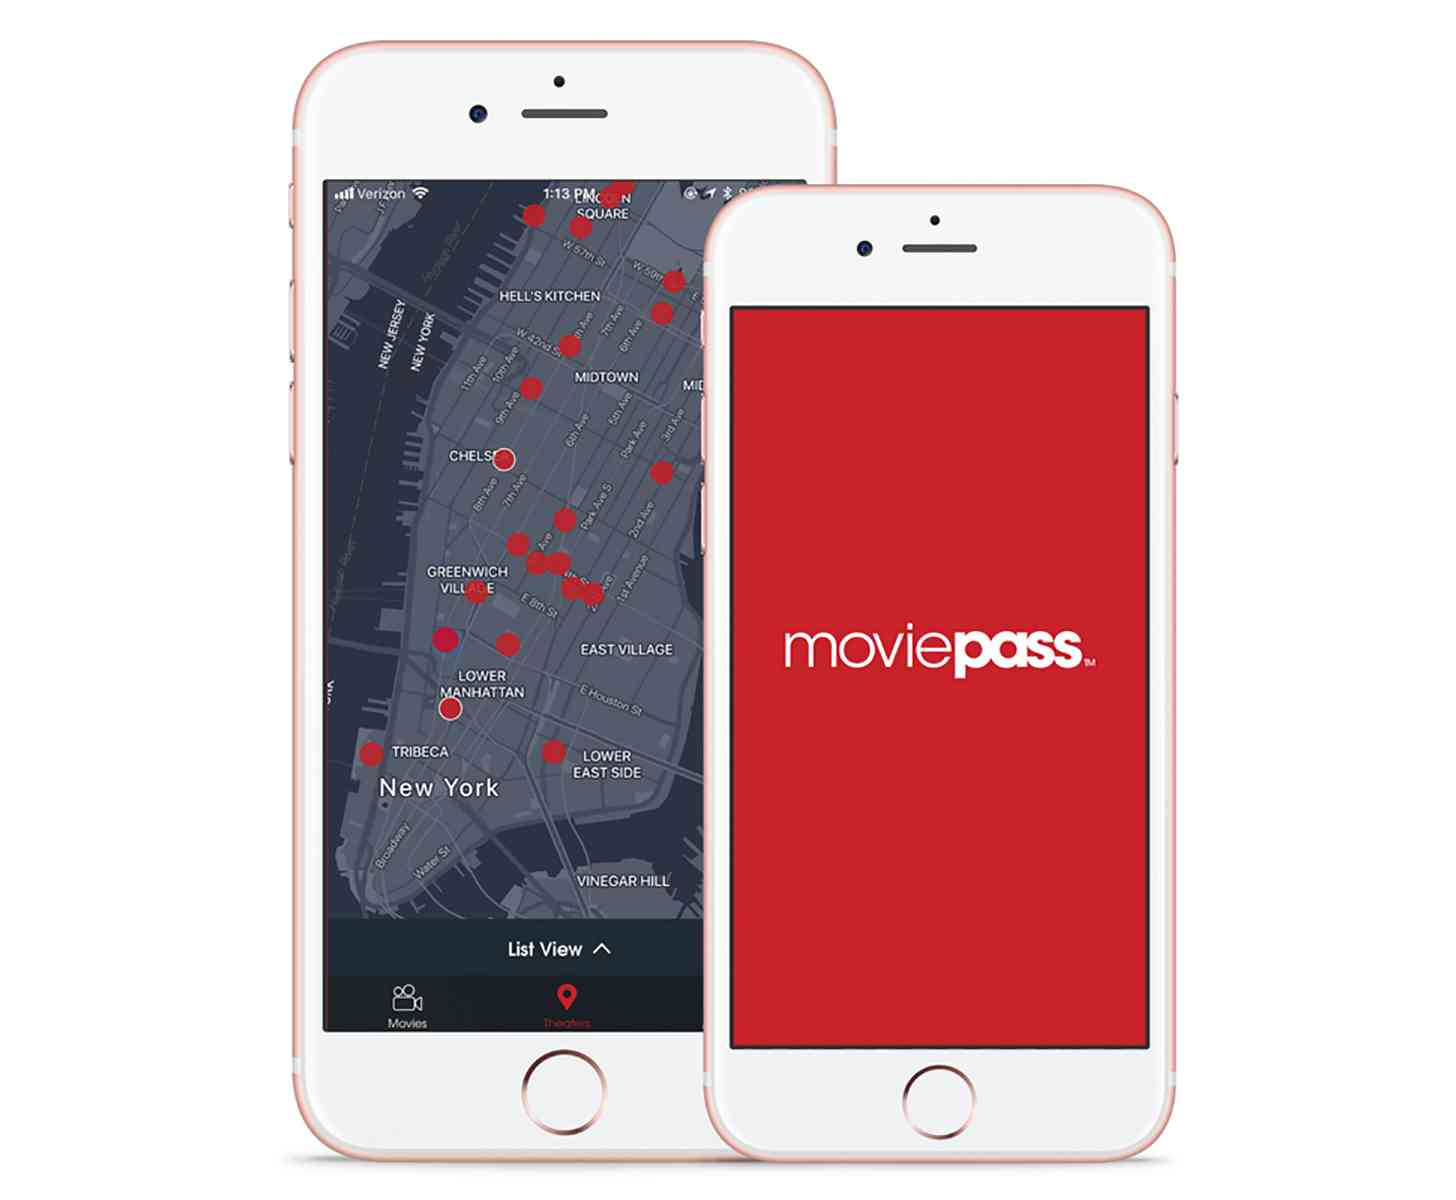 MoviePass official